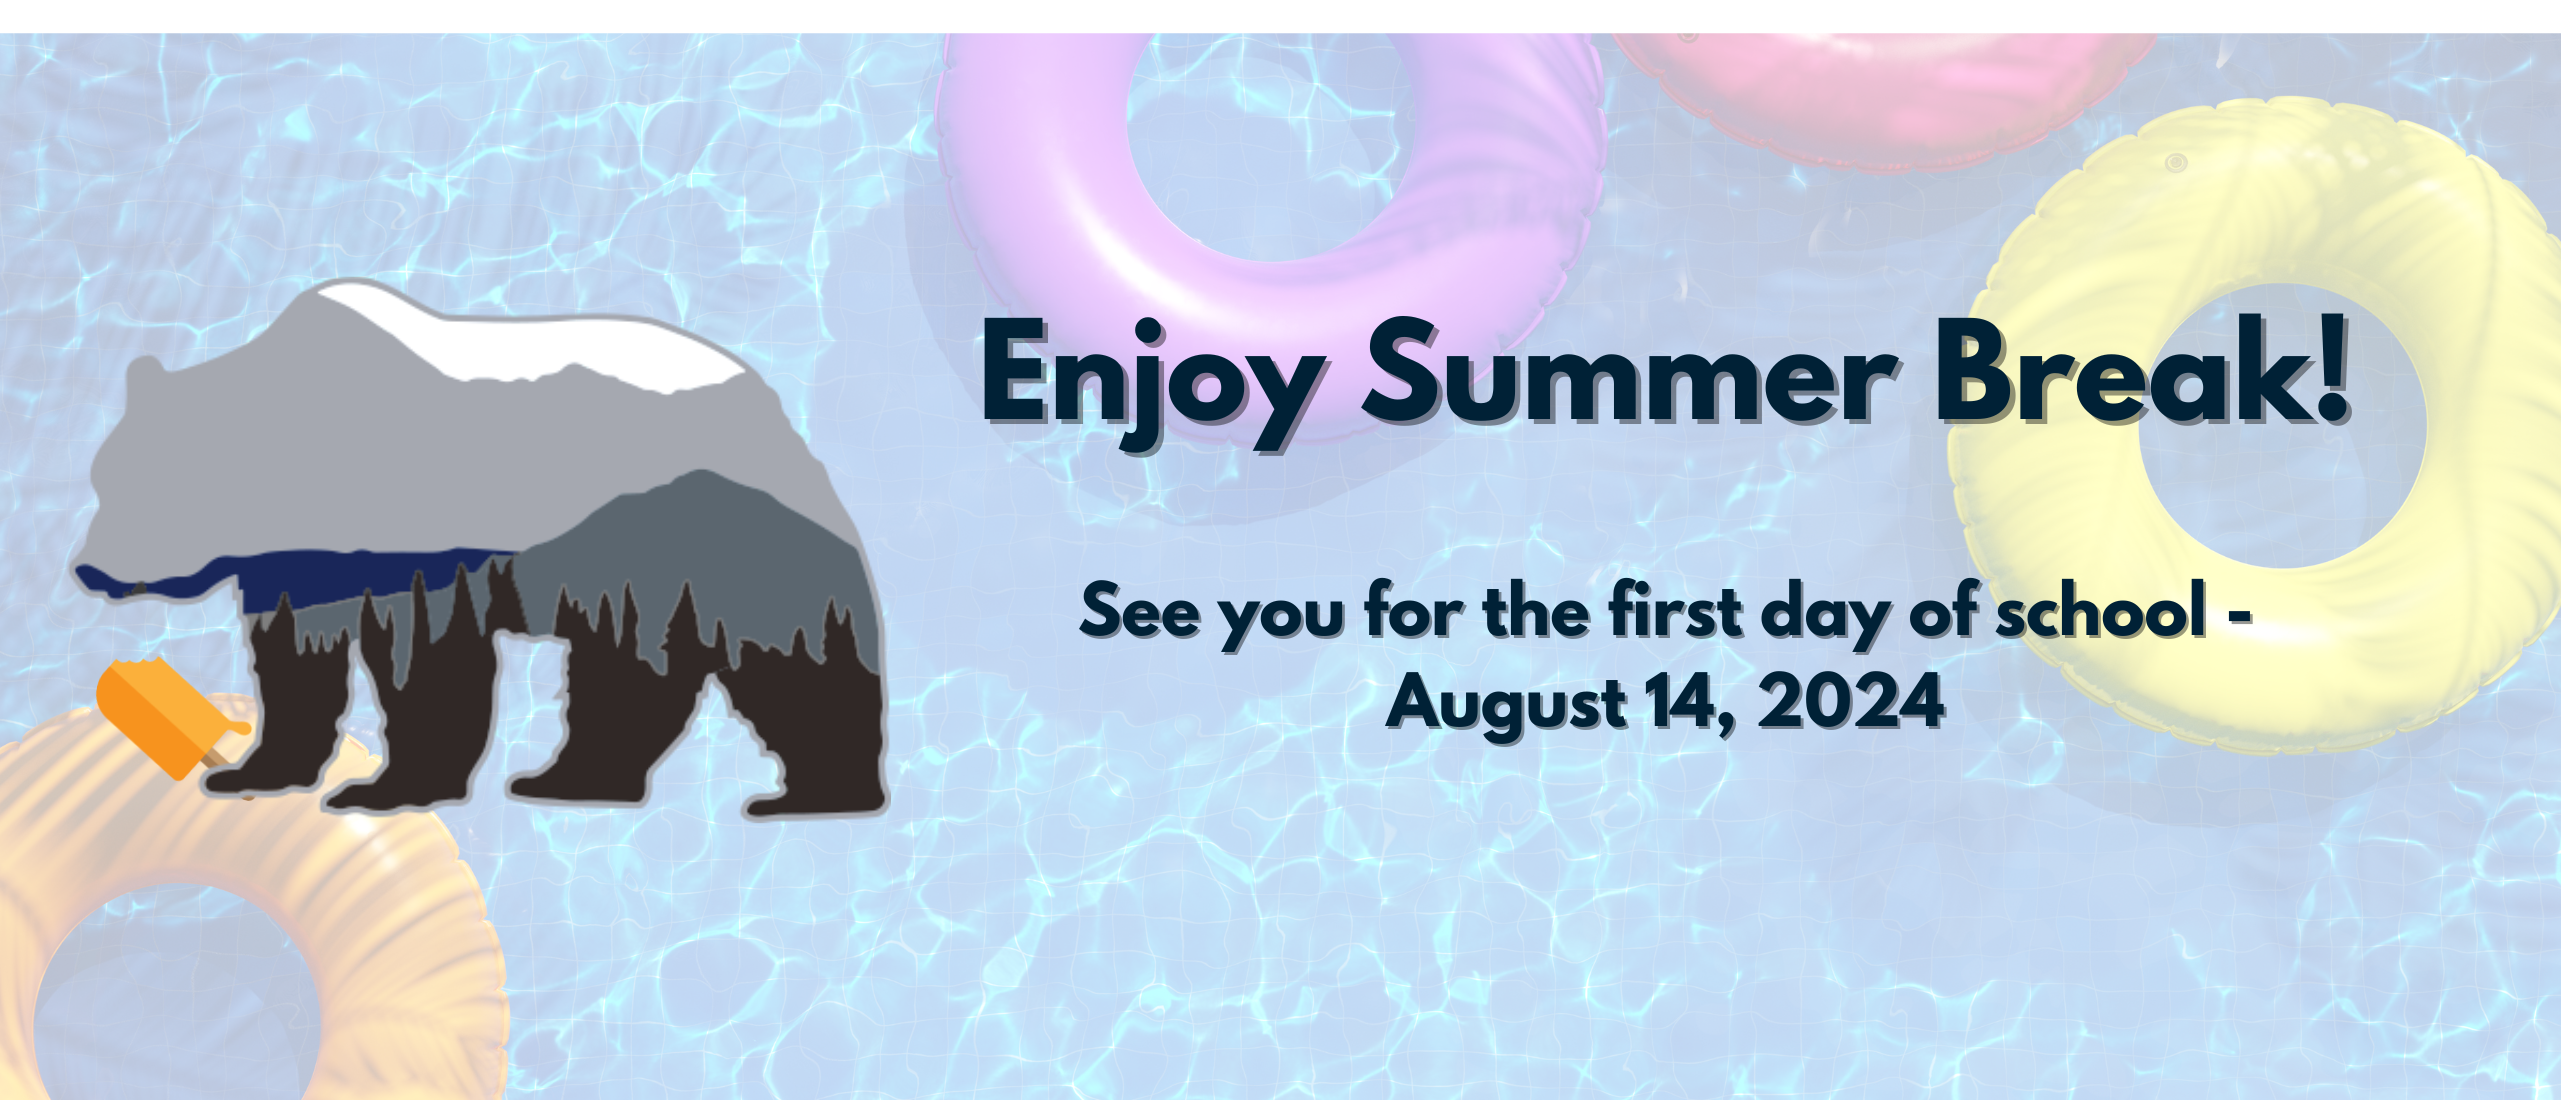 background image of pool water with floats in it; Pepper Ridge bear logo holding a popsicle; text on image reads "Enjoy Summer Break - See you for the first day of school - August 14, 2024" 